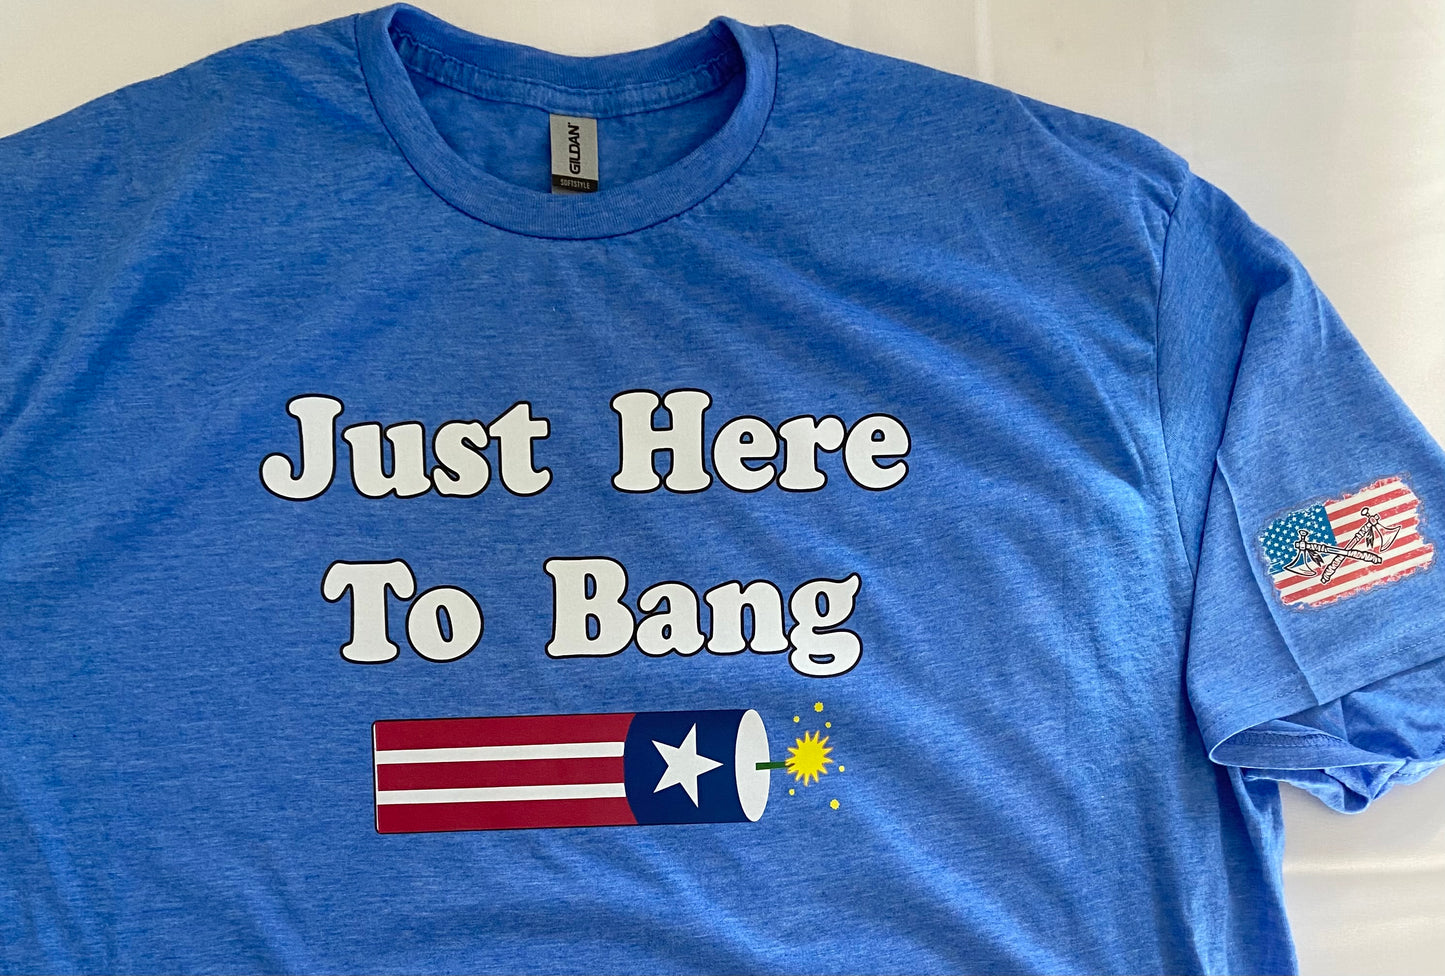 Funny Tee - Just Here To Bang - Fireworks